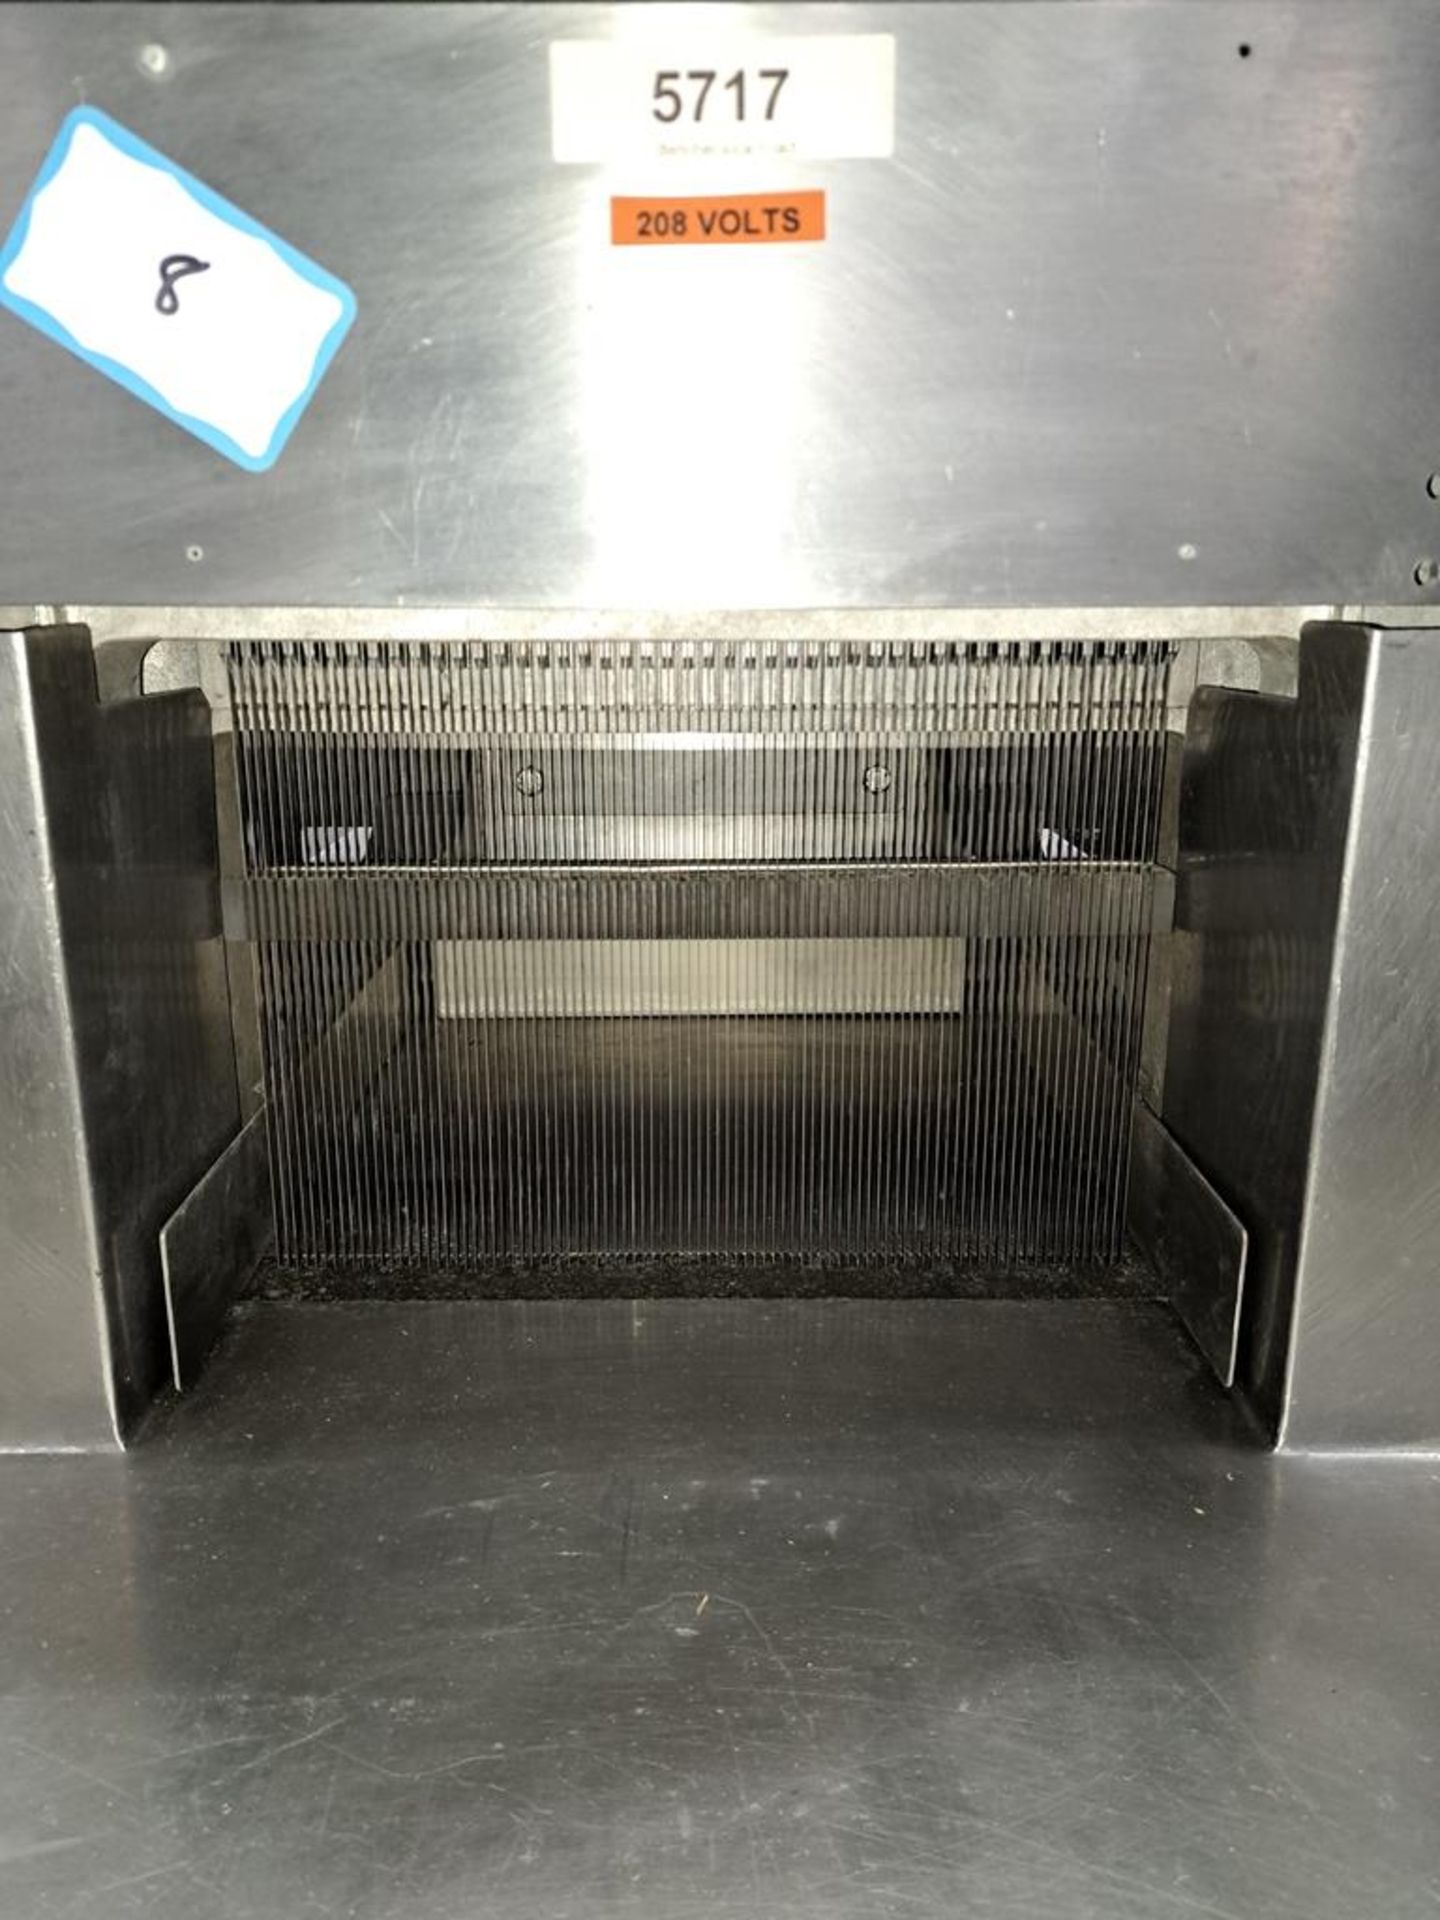 Bettcher Mdl. BH15 Slice-N-Tact Reciprocating Blade Slicer, .15" wide cutting harp, 208 volts, 3 - Image 3 of 9